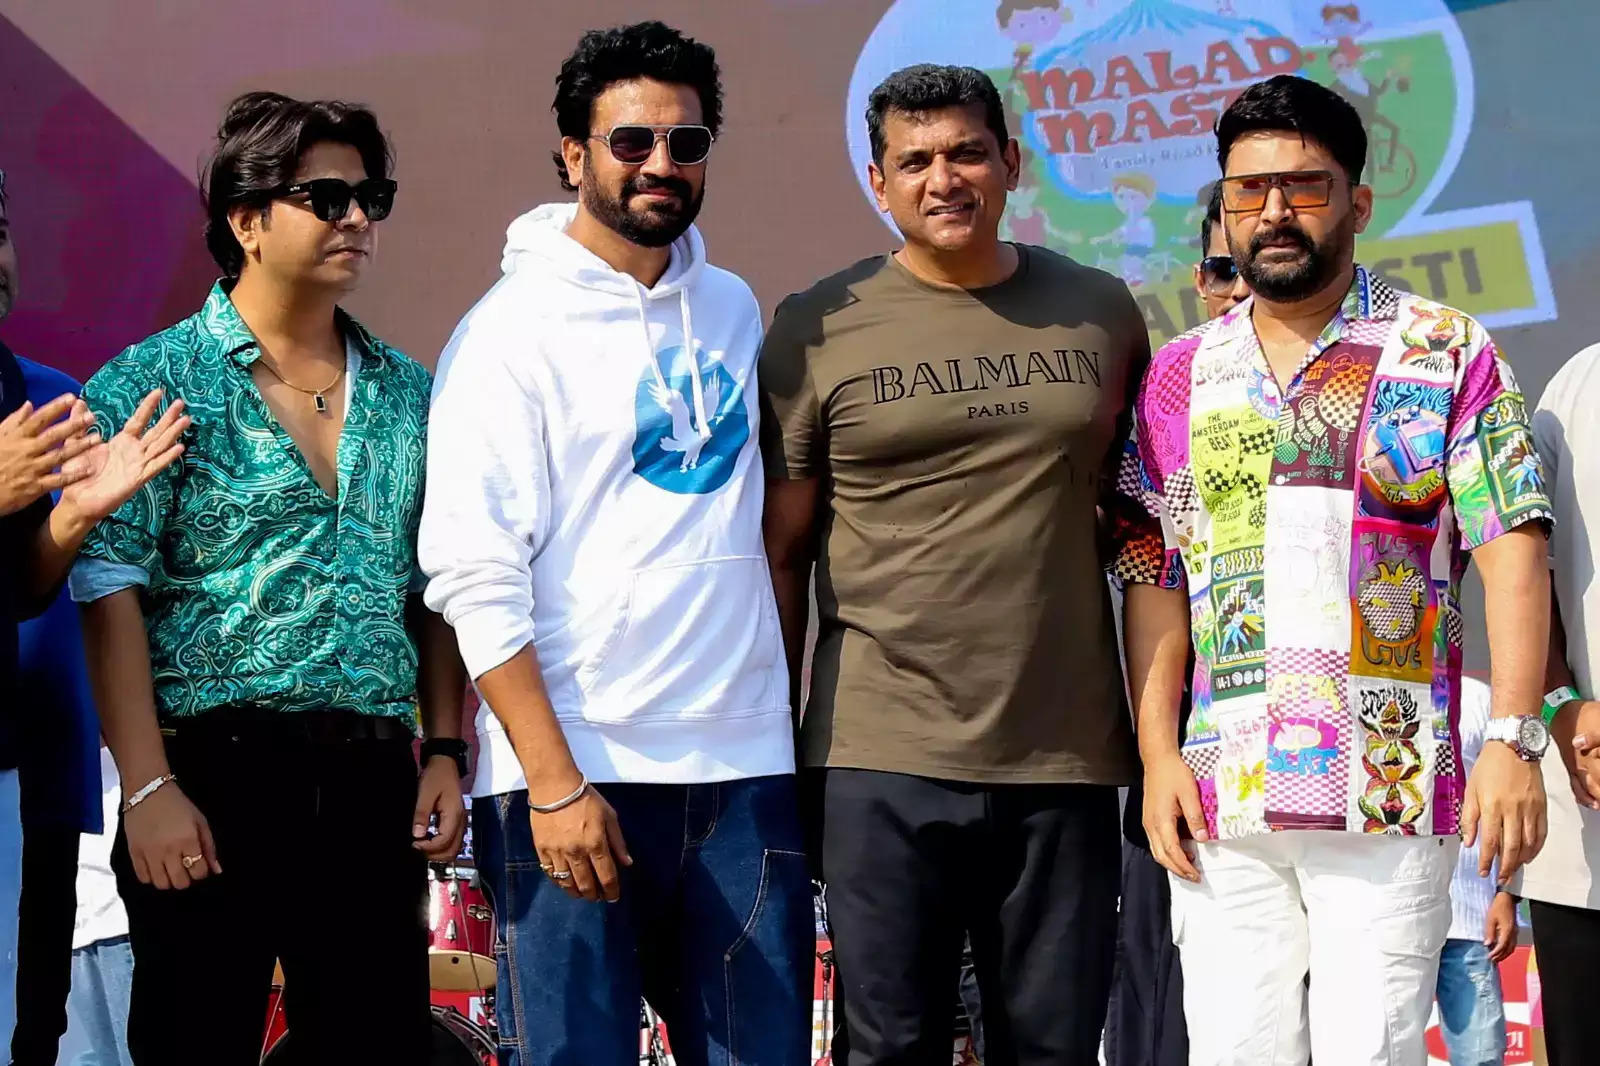 MLA Aslam Shaikh ‘s 7th Edition of “Malad Masti “Mumbai ‘s biggest Street featival , an Unique concept with 80K whooping crowd every sunday of December is spearheaded under his charismatic leadership